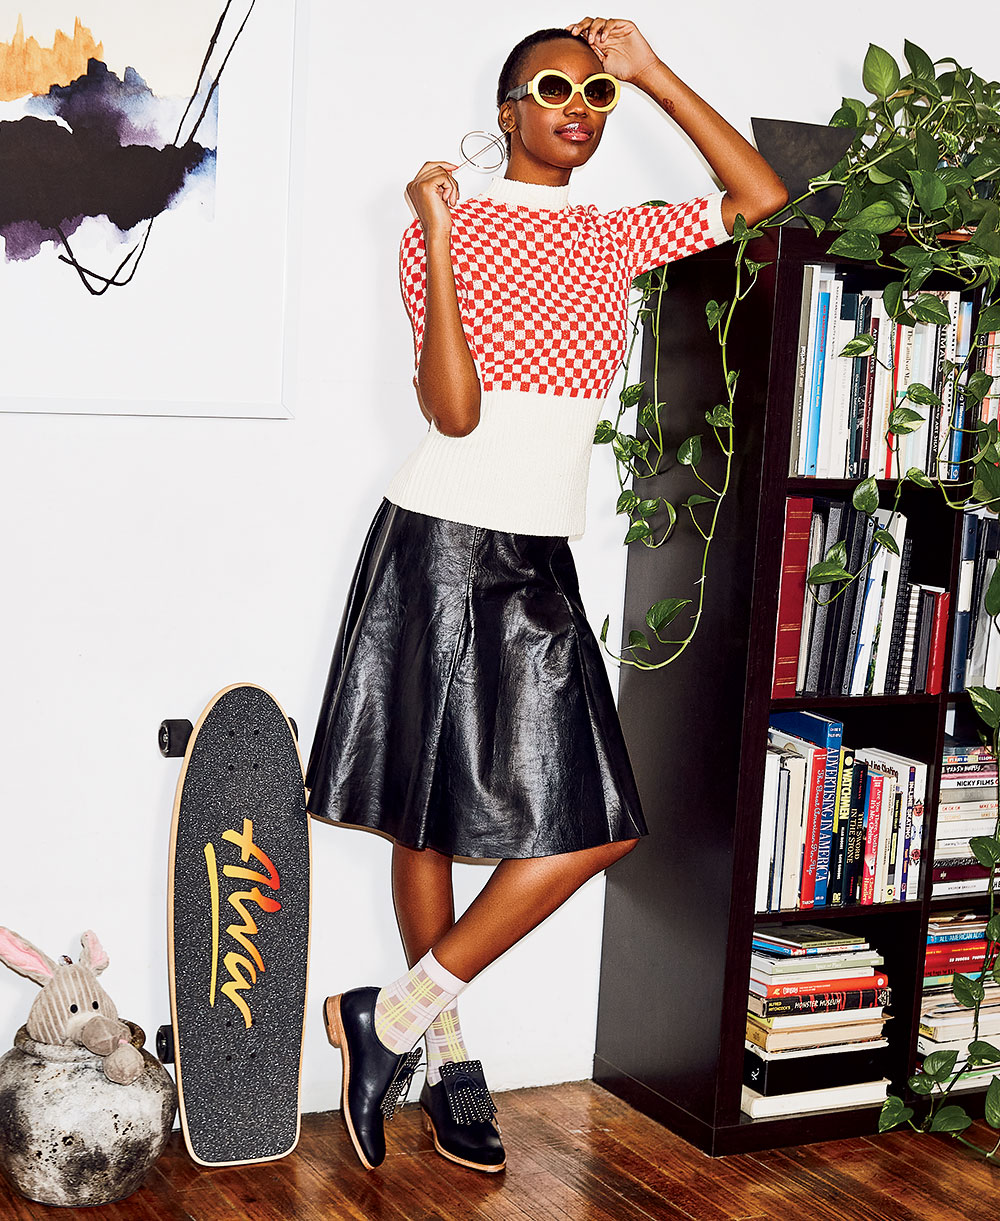 Sportmax cotton sweater and leather skirt, Histoire de Voir acetate and leather sunglasses, Studio SS earrings, Greta calf socks and The Office of Angela Scott Ms. Jane leather oxfords